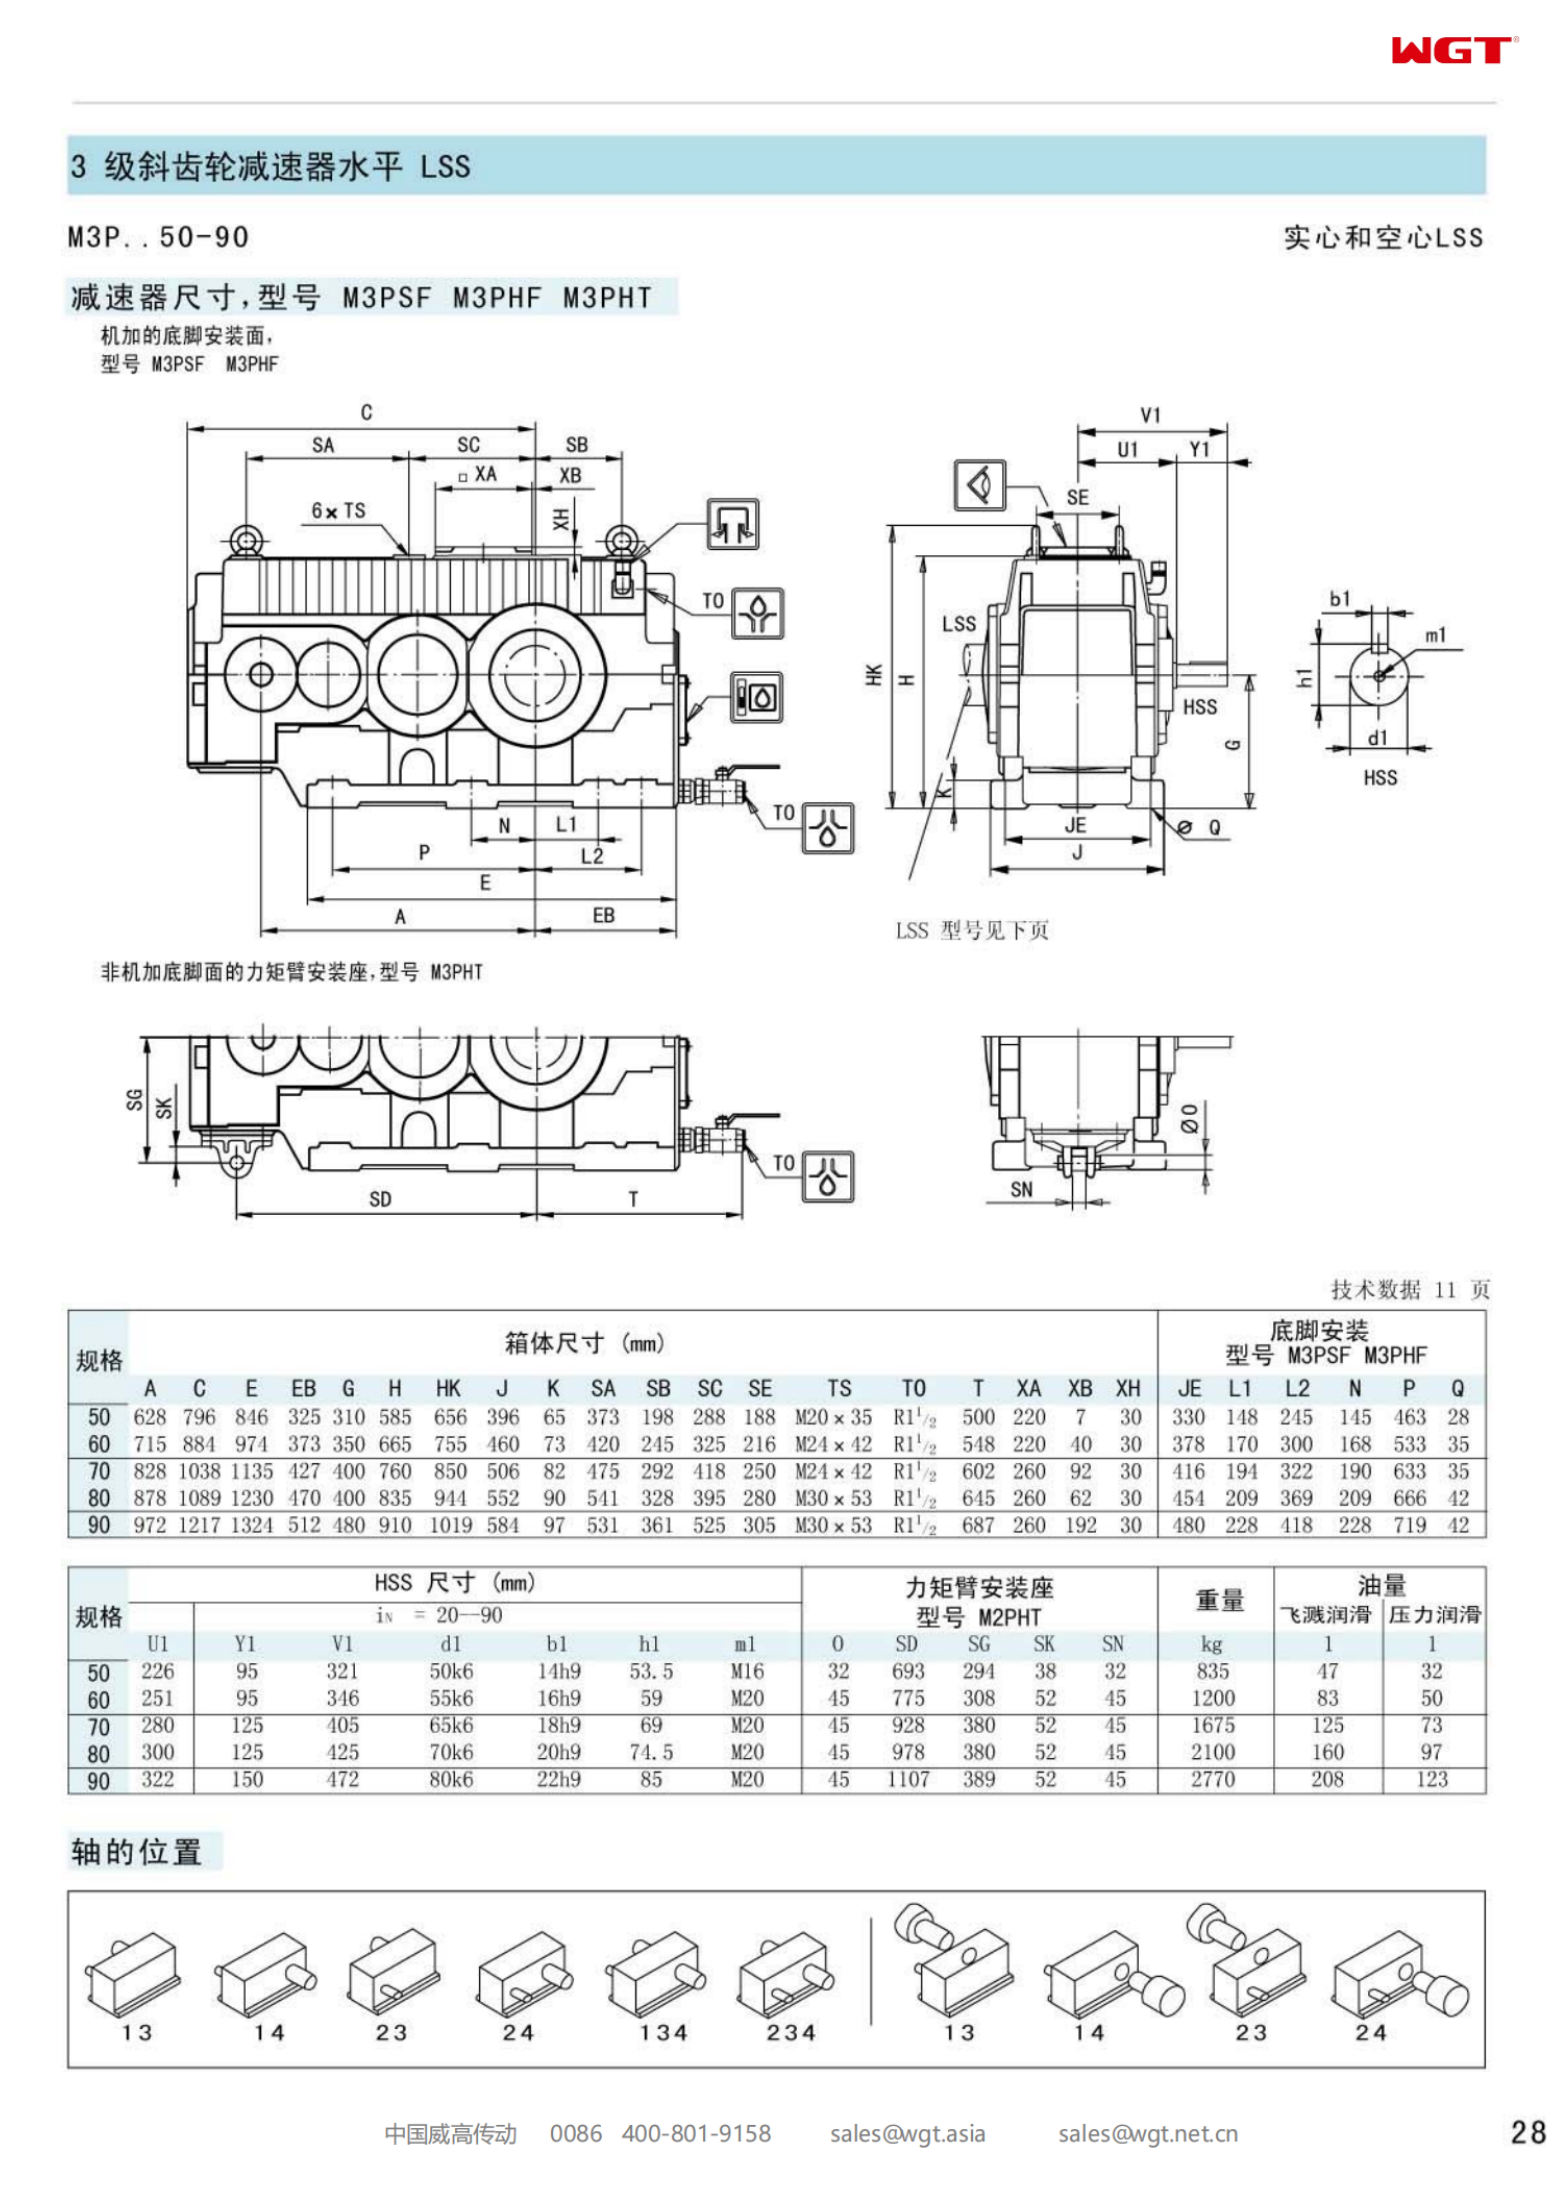 M3PHF80 Replace_SEW_M_Series Gearbox